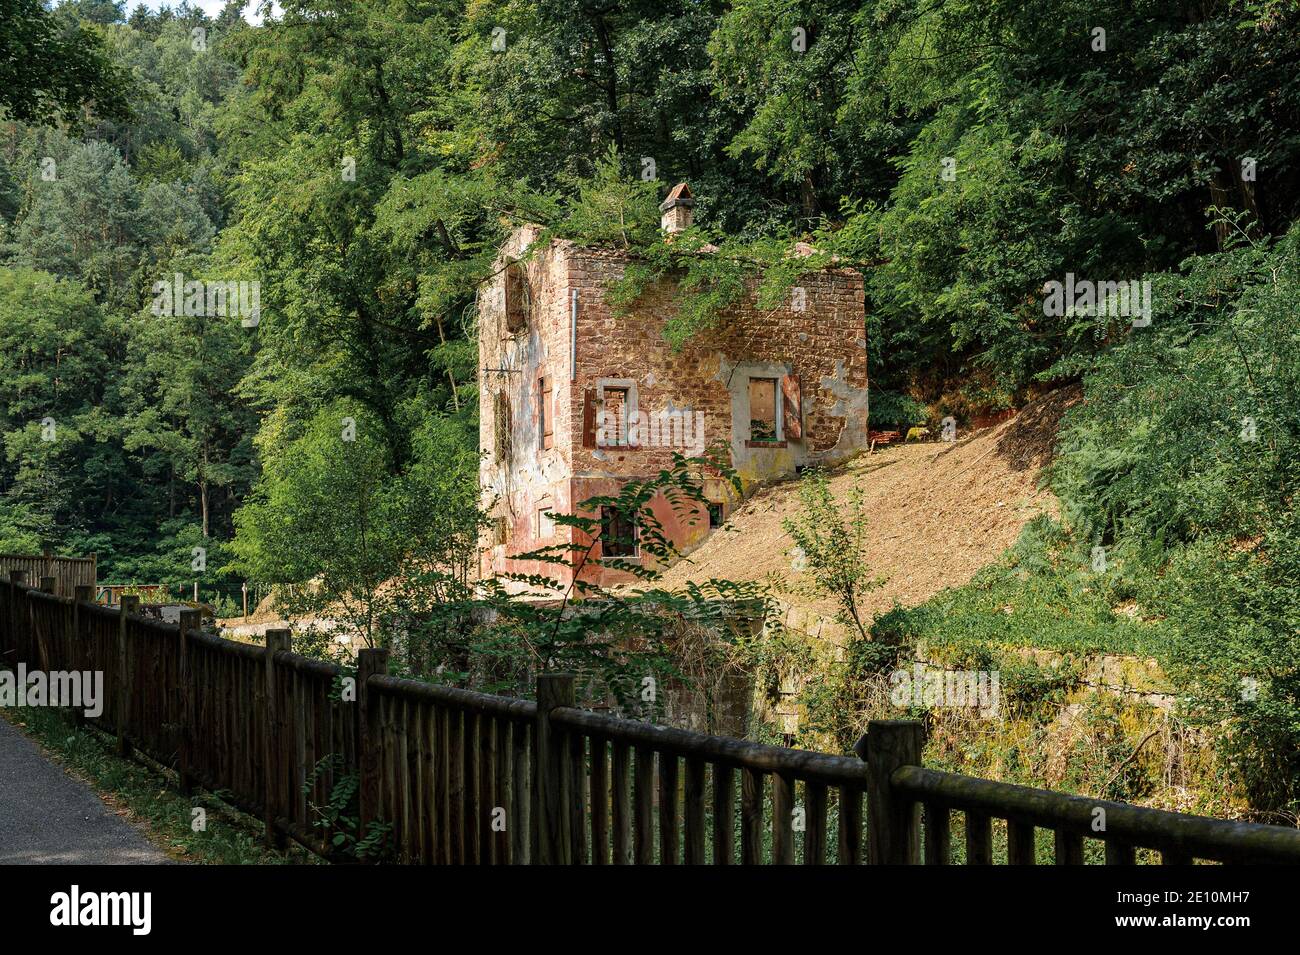 Région de Saverne nord-est de la France. On the edge of an abandoned canal, a lock keeper's house in ruins. Stock Photo